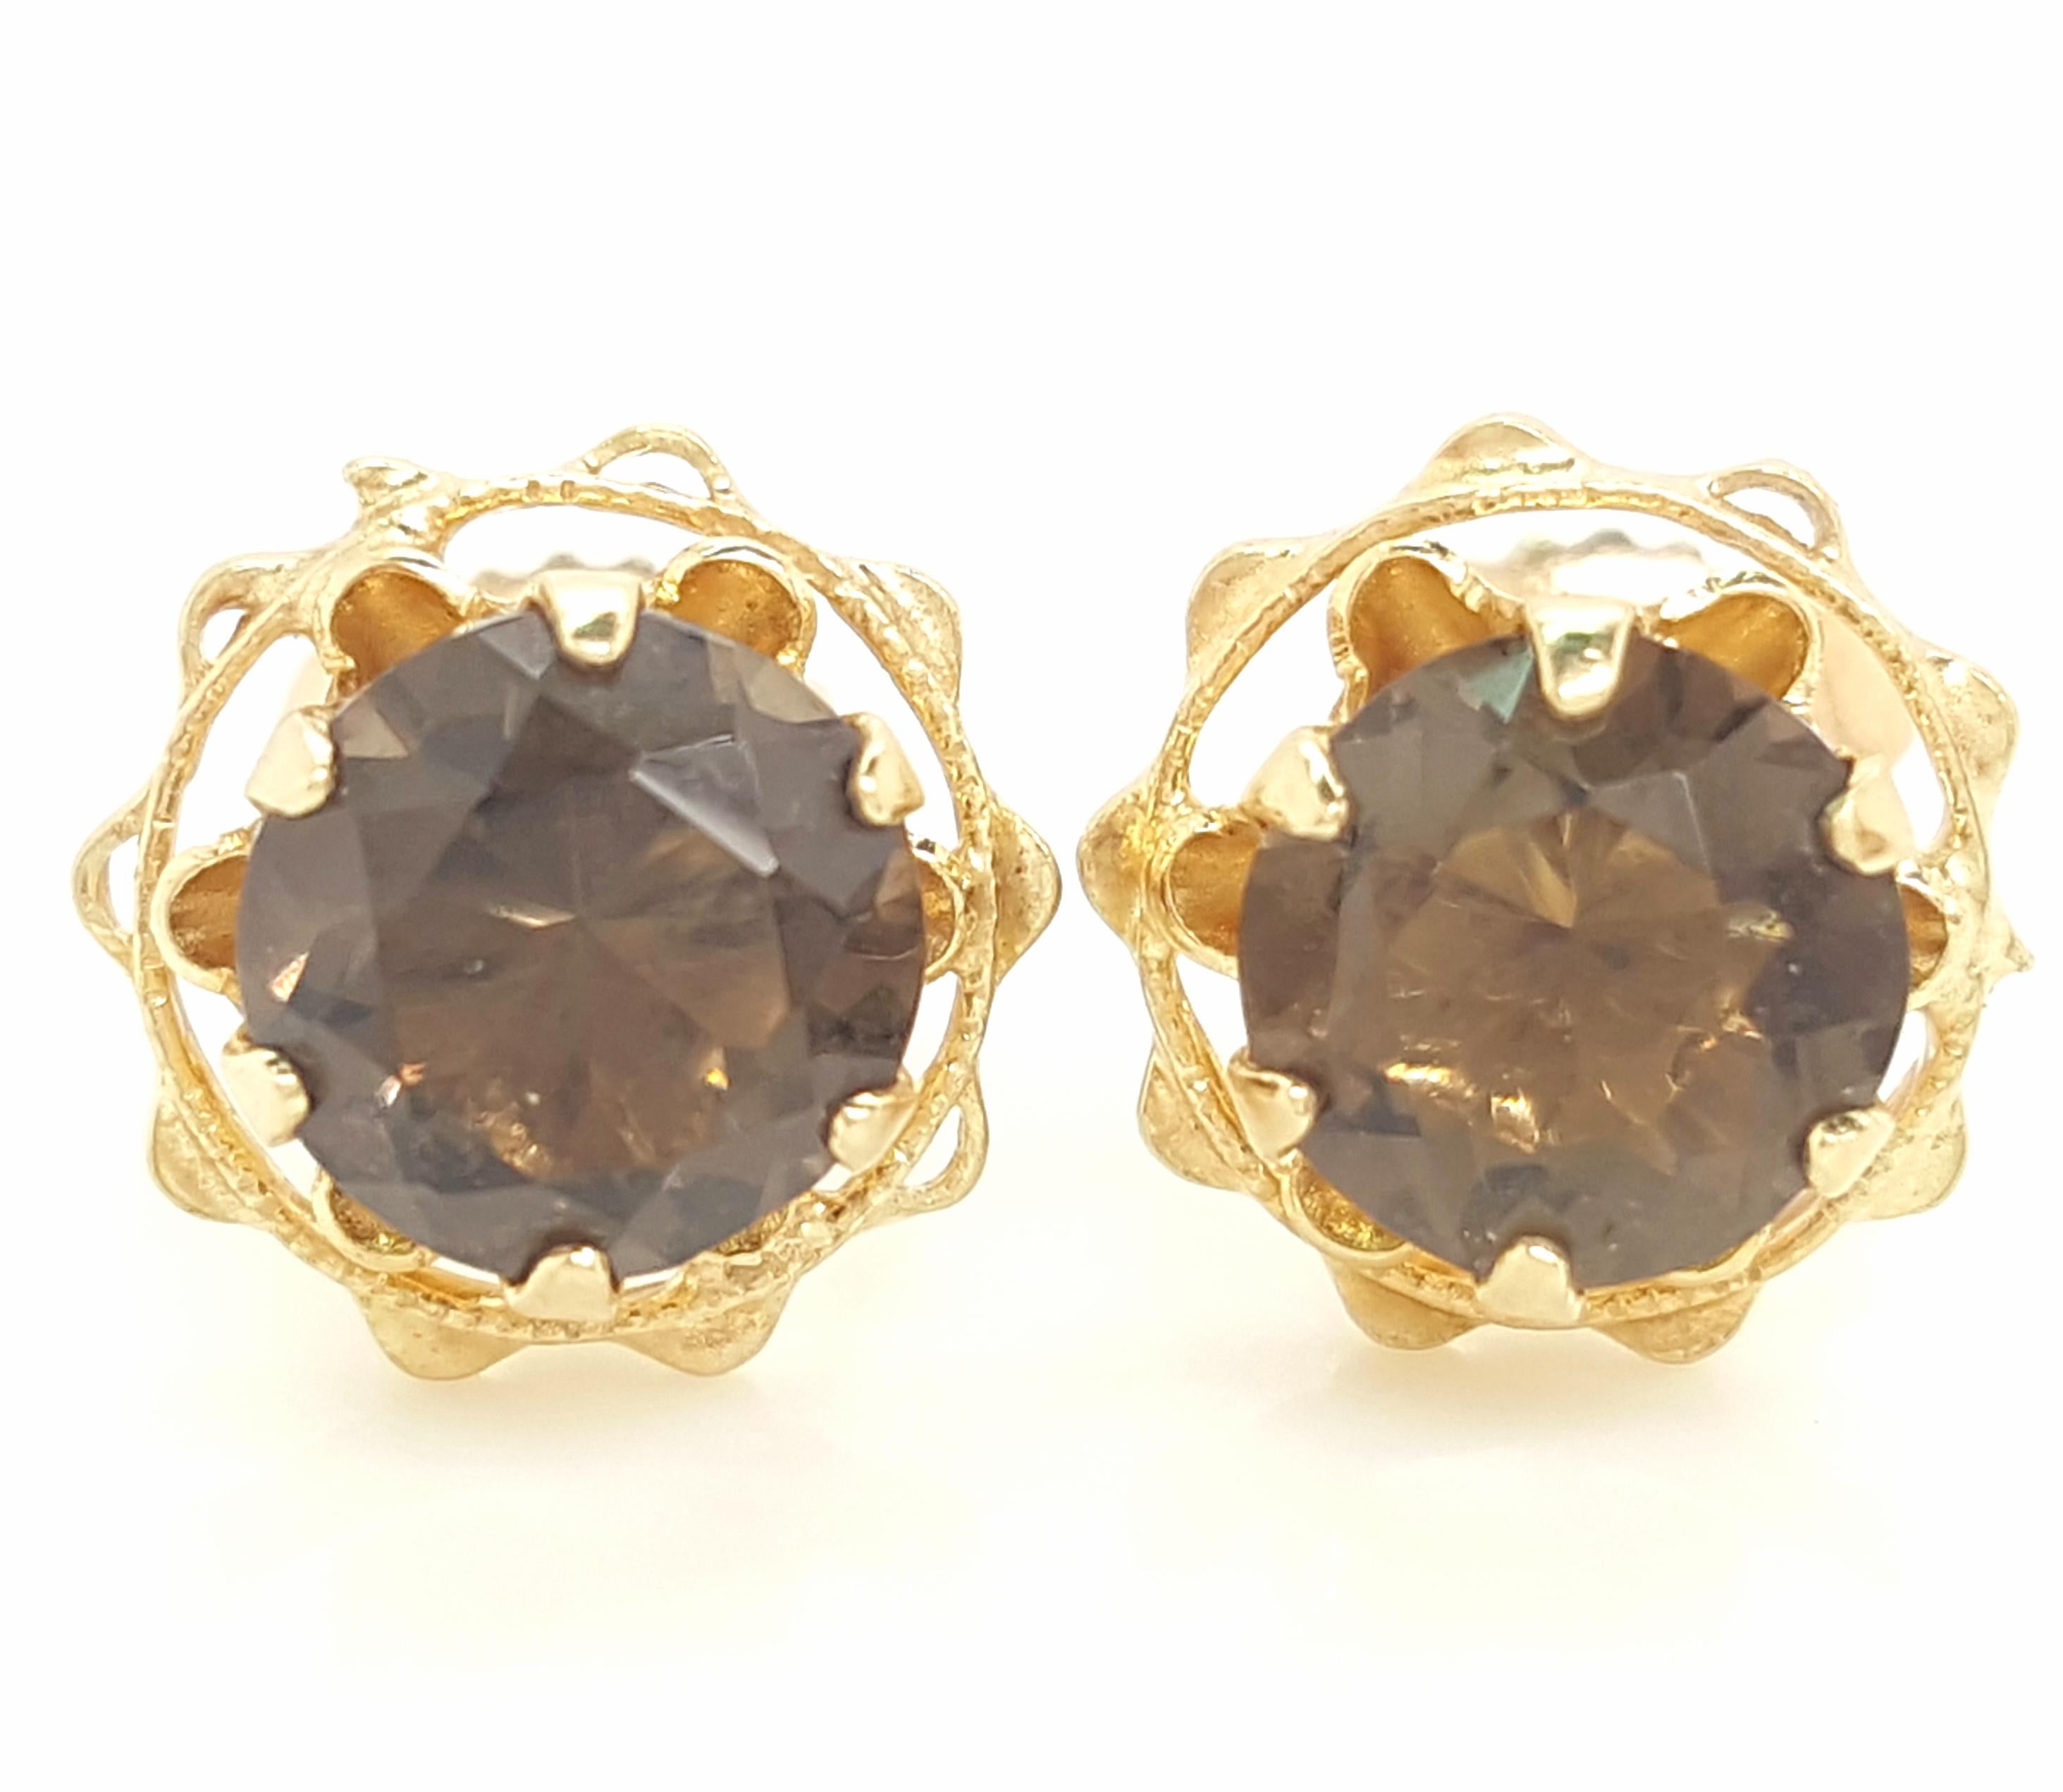 14 Karat Yellow Gold Round Smokey Quartz Stud Earrings.  The earrings feature a matched pair of faceted round smokey quartz weighing approximately  1.69 carats.  The quartz are each set into a 14 karat yellow gold six prong tulip setting with a